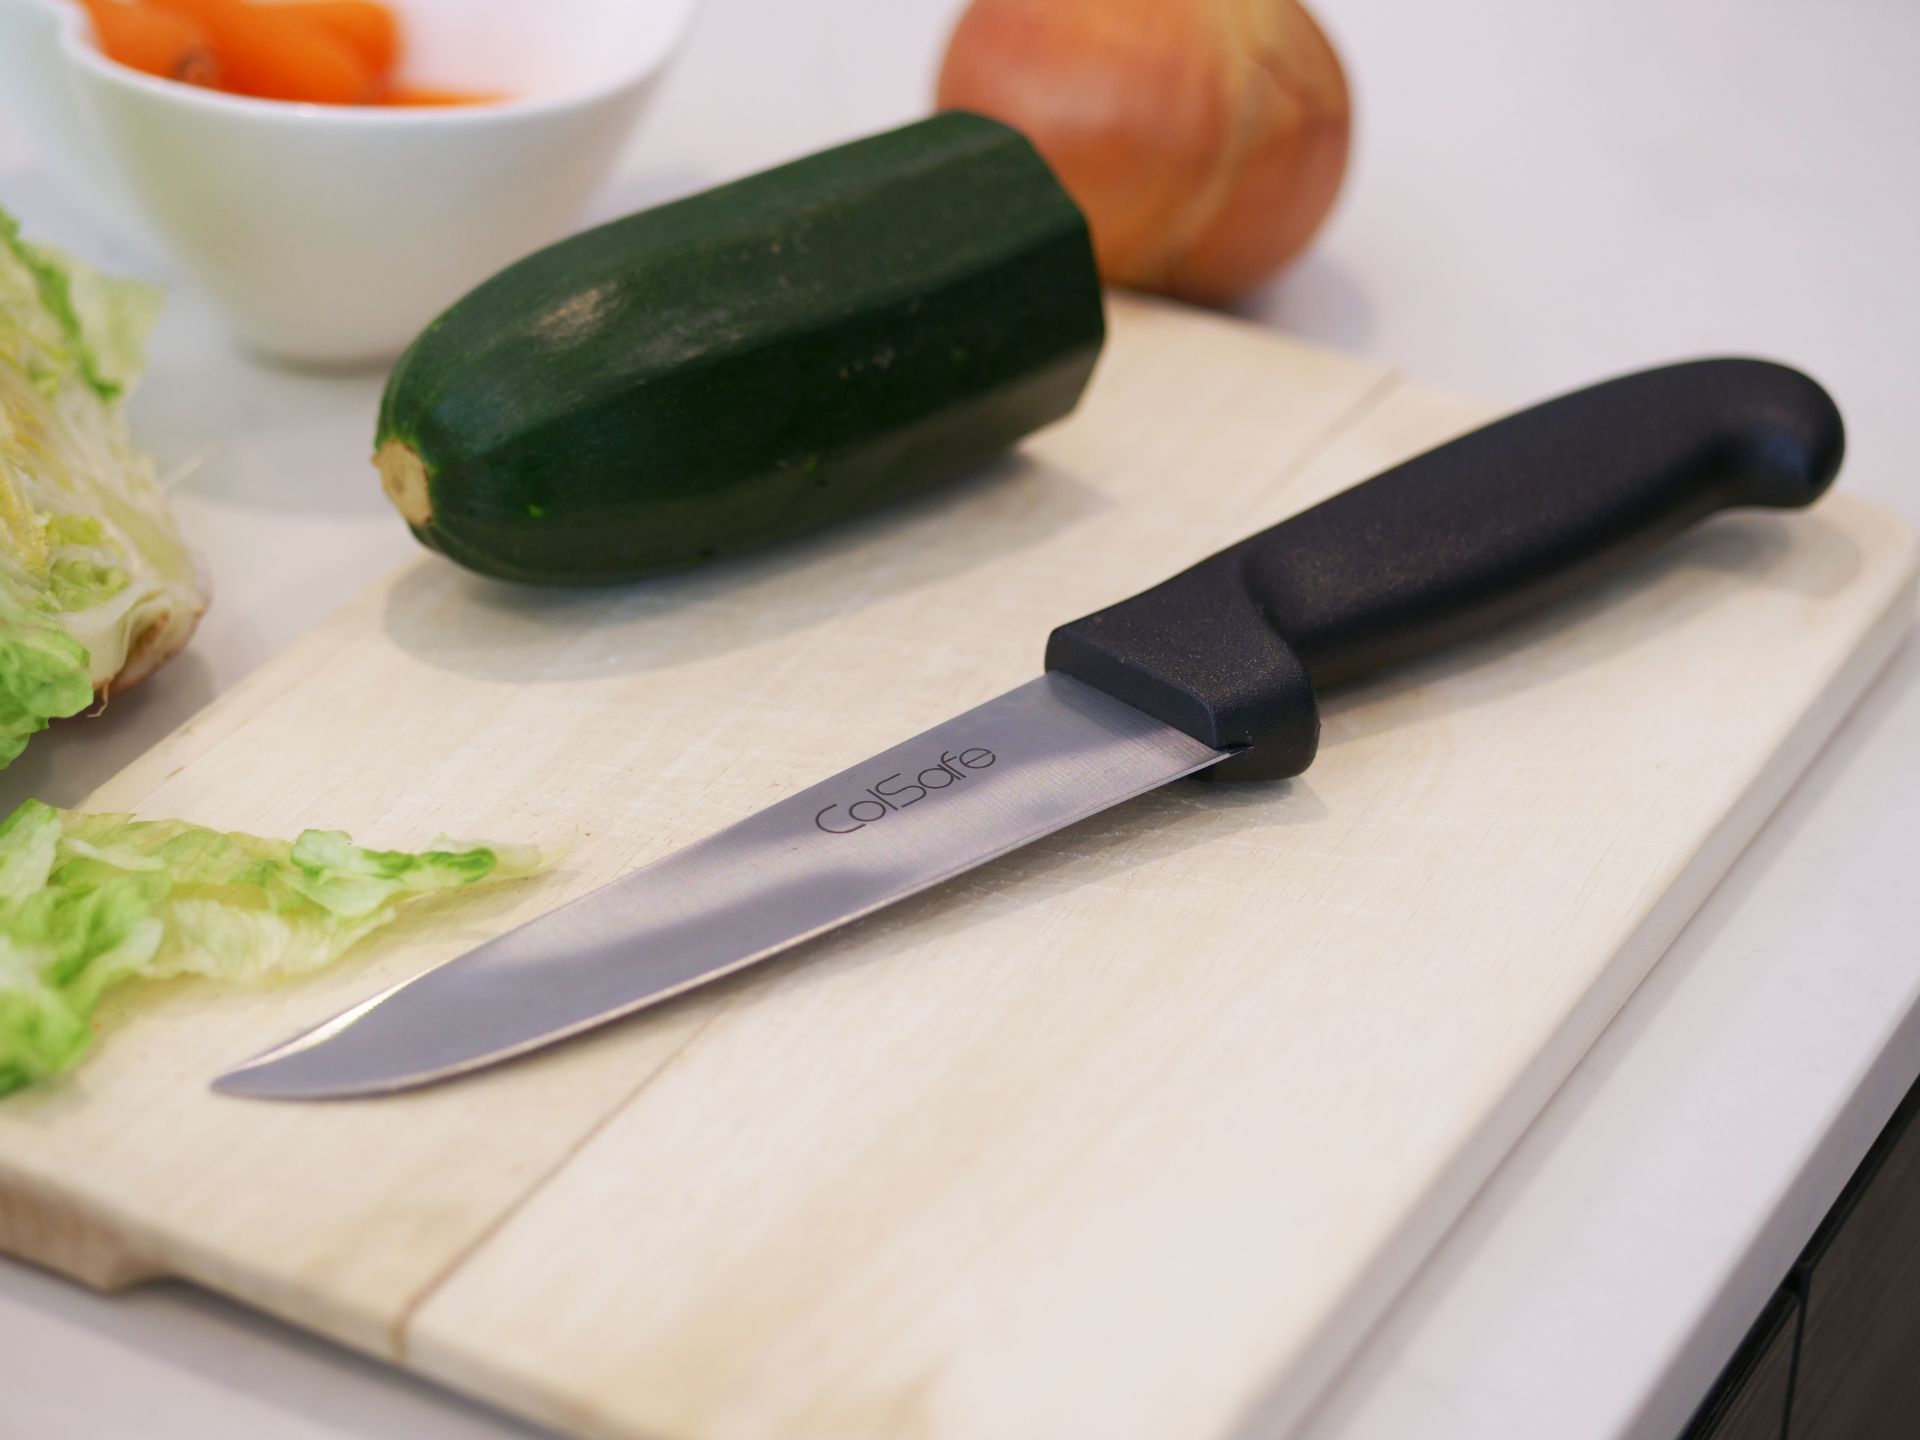 100x Cook's Knives (15cm / 6in) | Brand New | Individually Packaged - Image 5 of 7